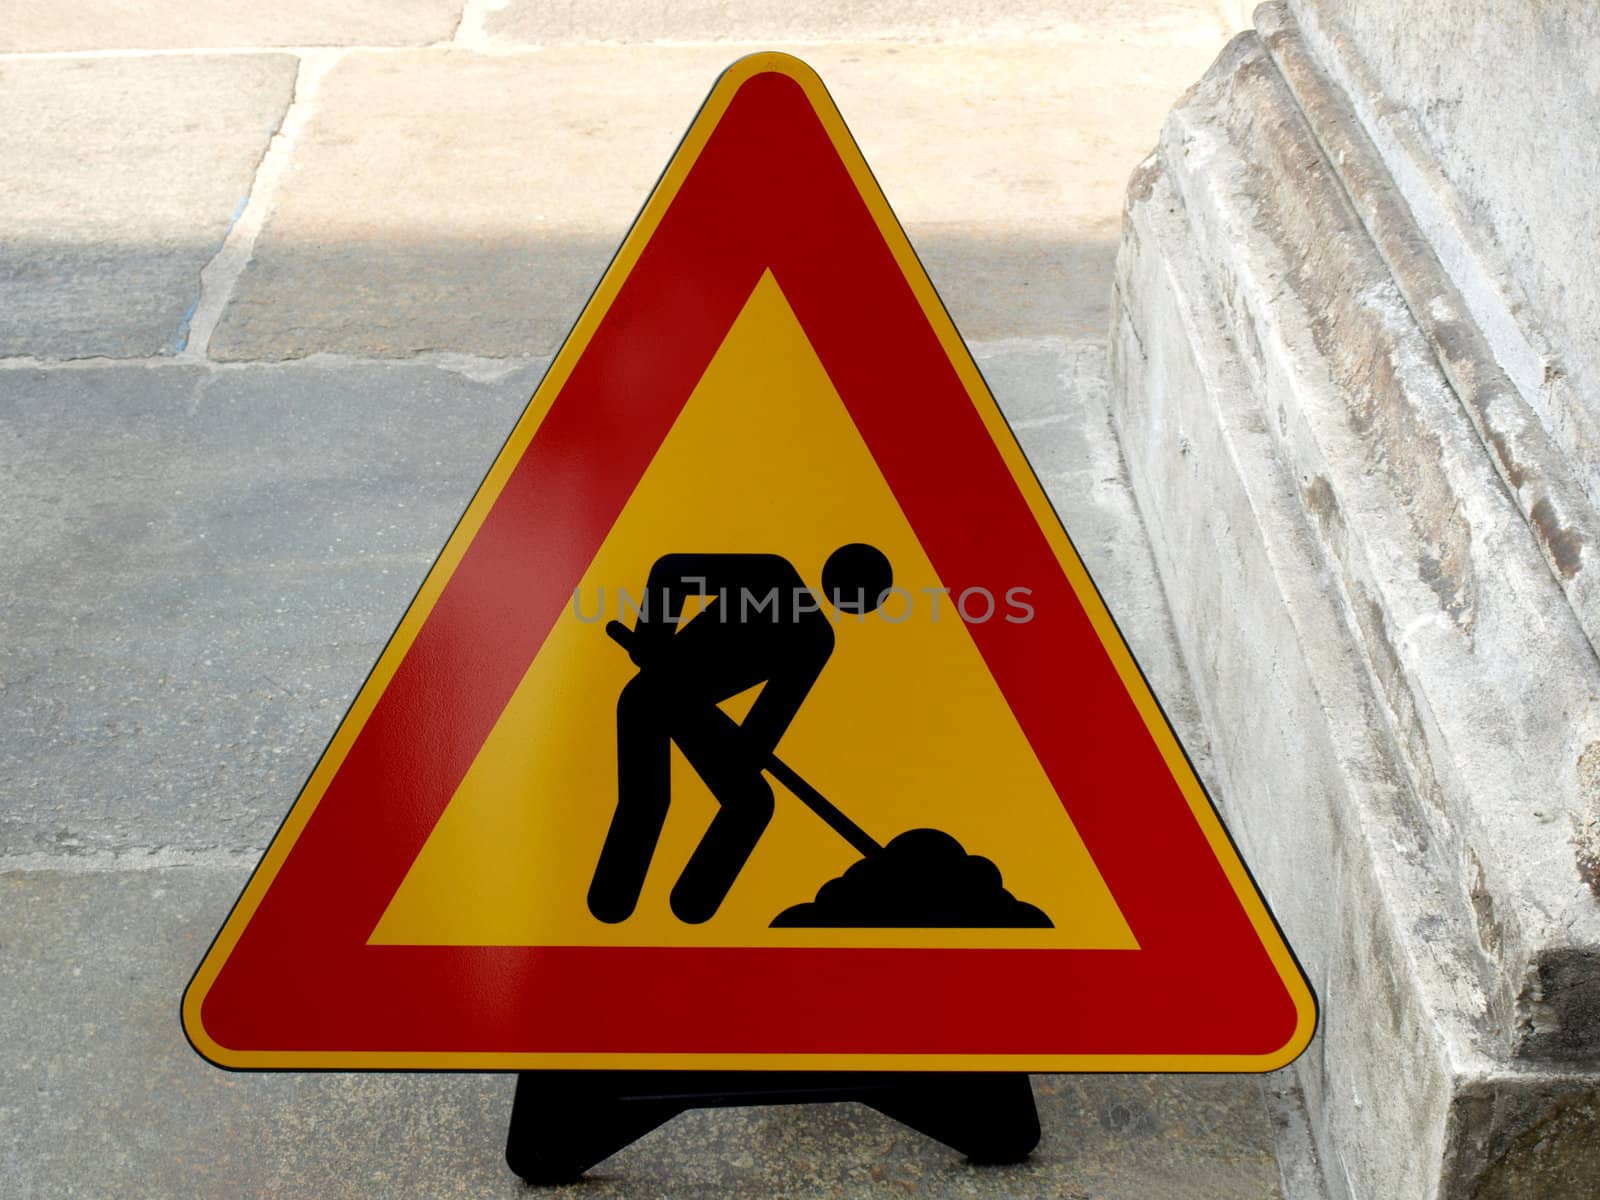 Road work sign by paolo77